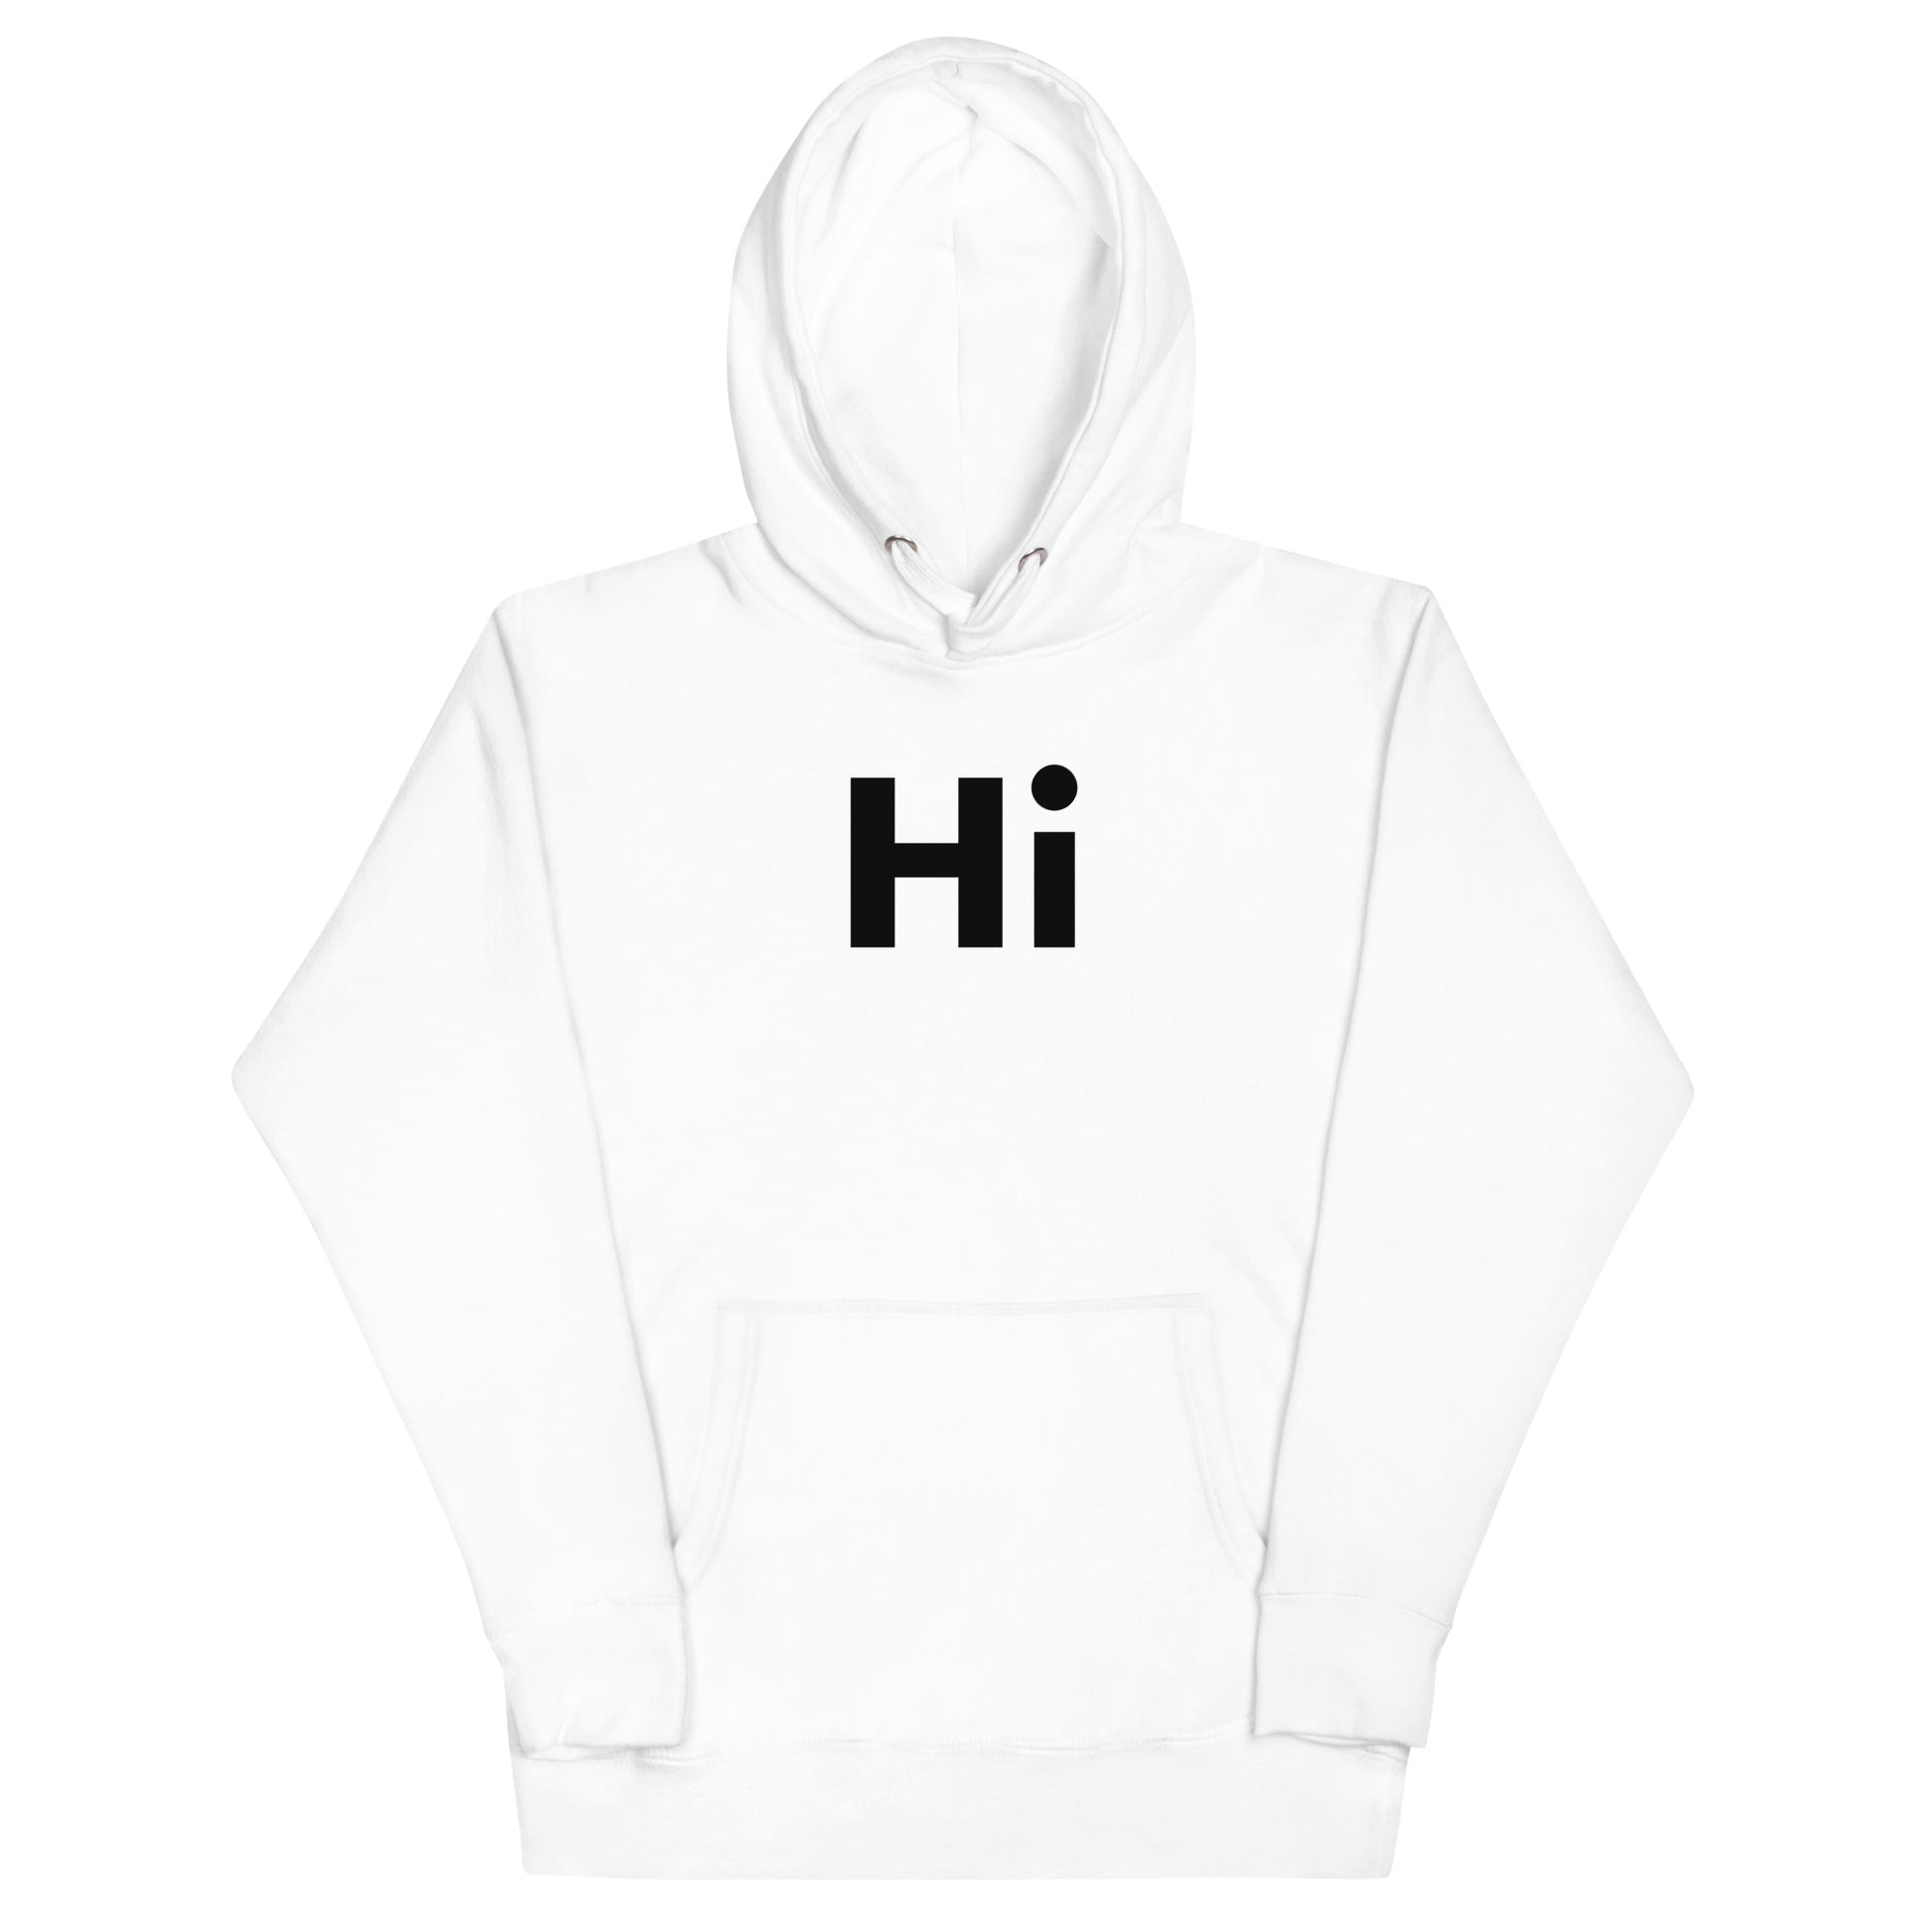 Hi Hoodie in White by Happy interactions